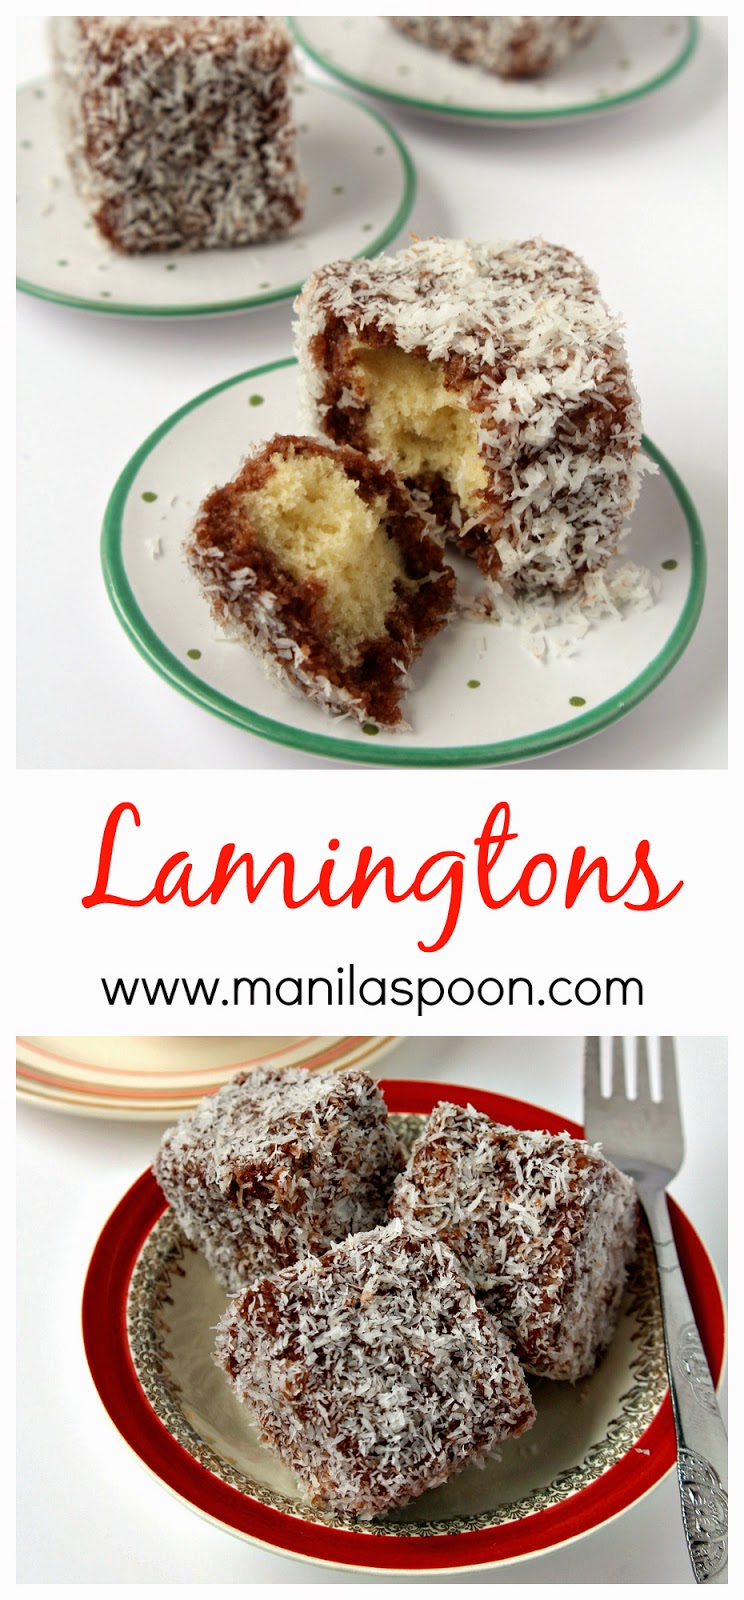  Lamingtons - delicious sponge cake dipped in chocolate sauce and then covered all over with shredded coconut, what's not to love?  #lamingtons